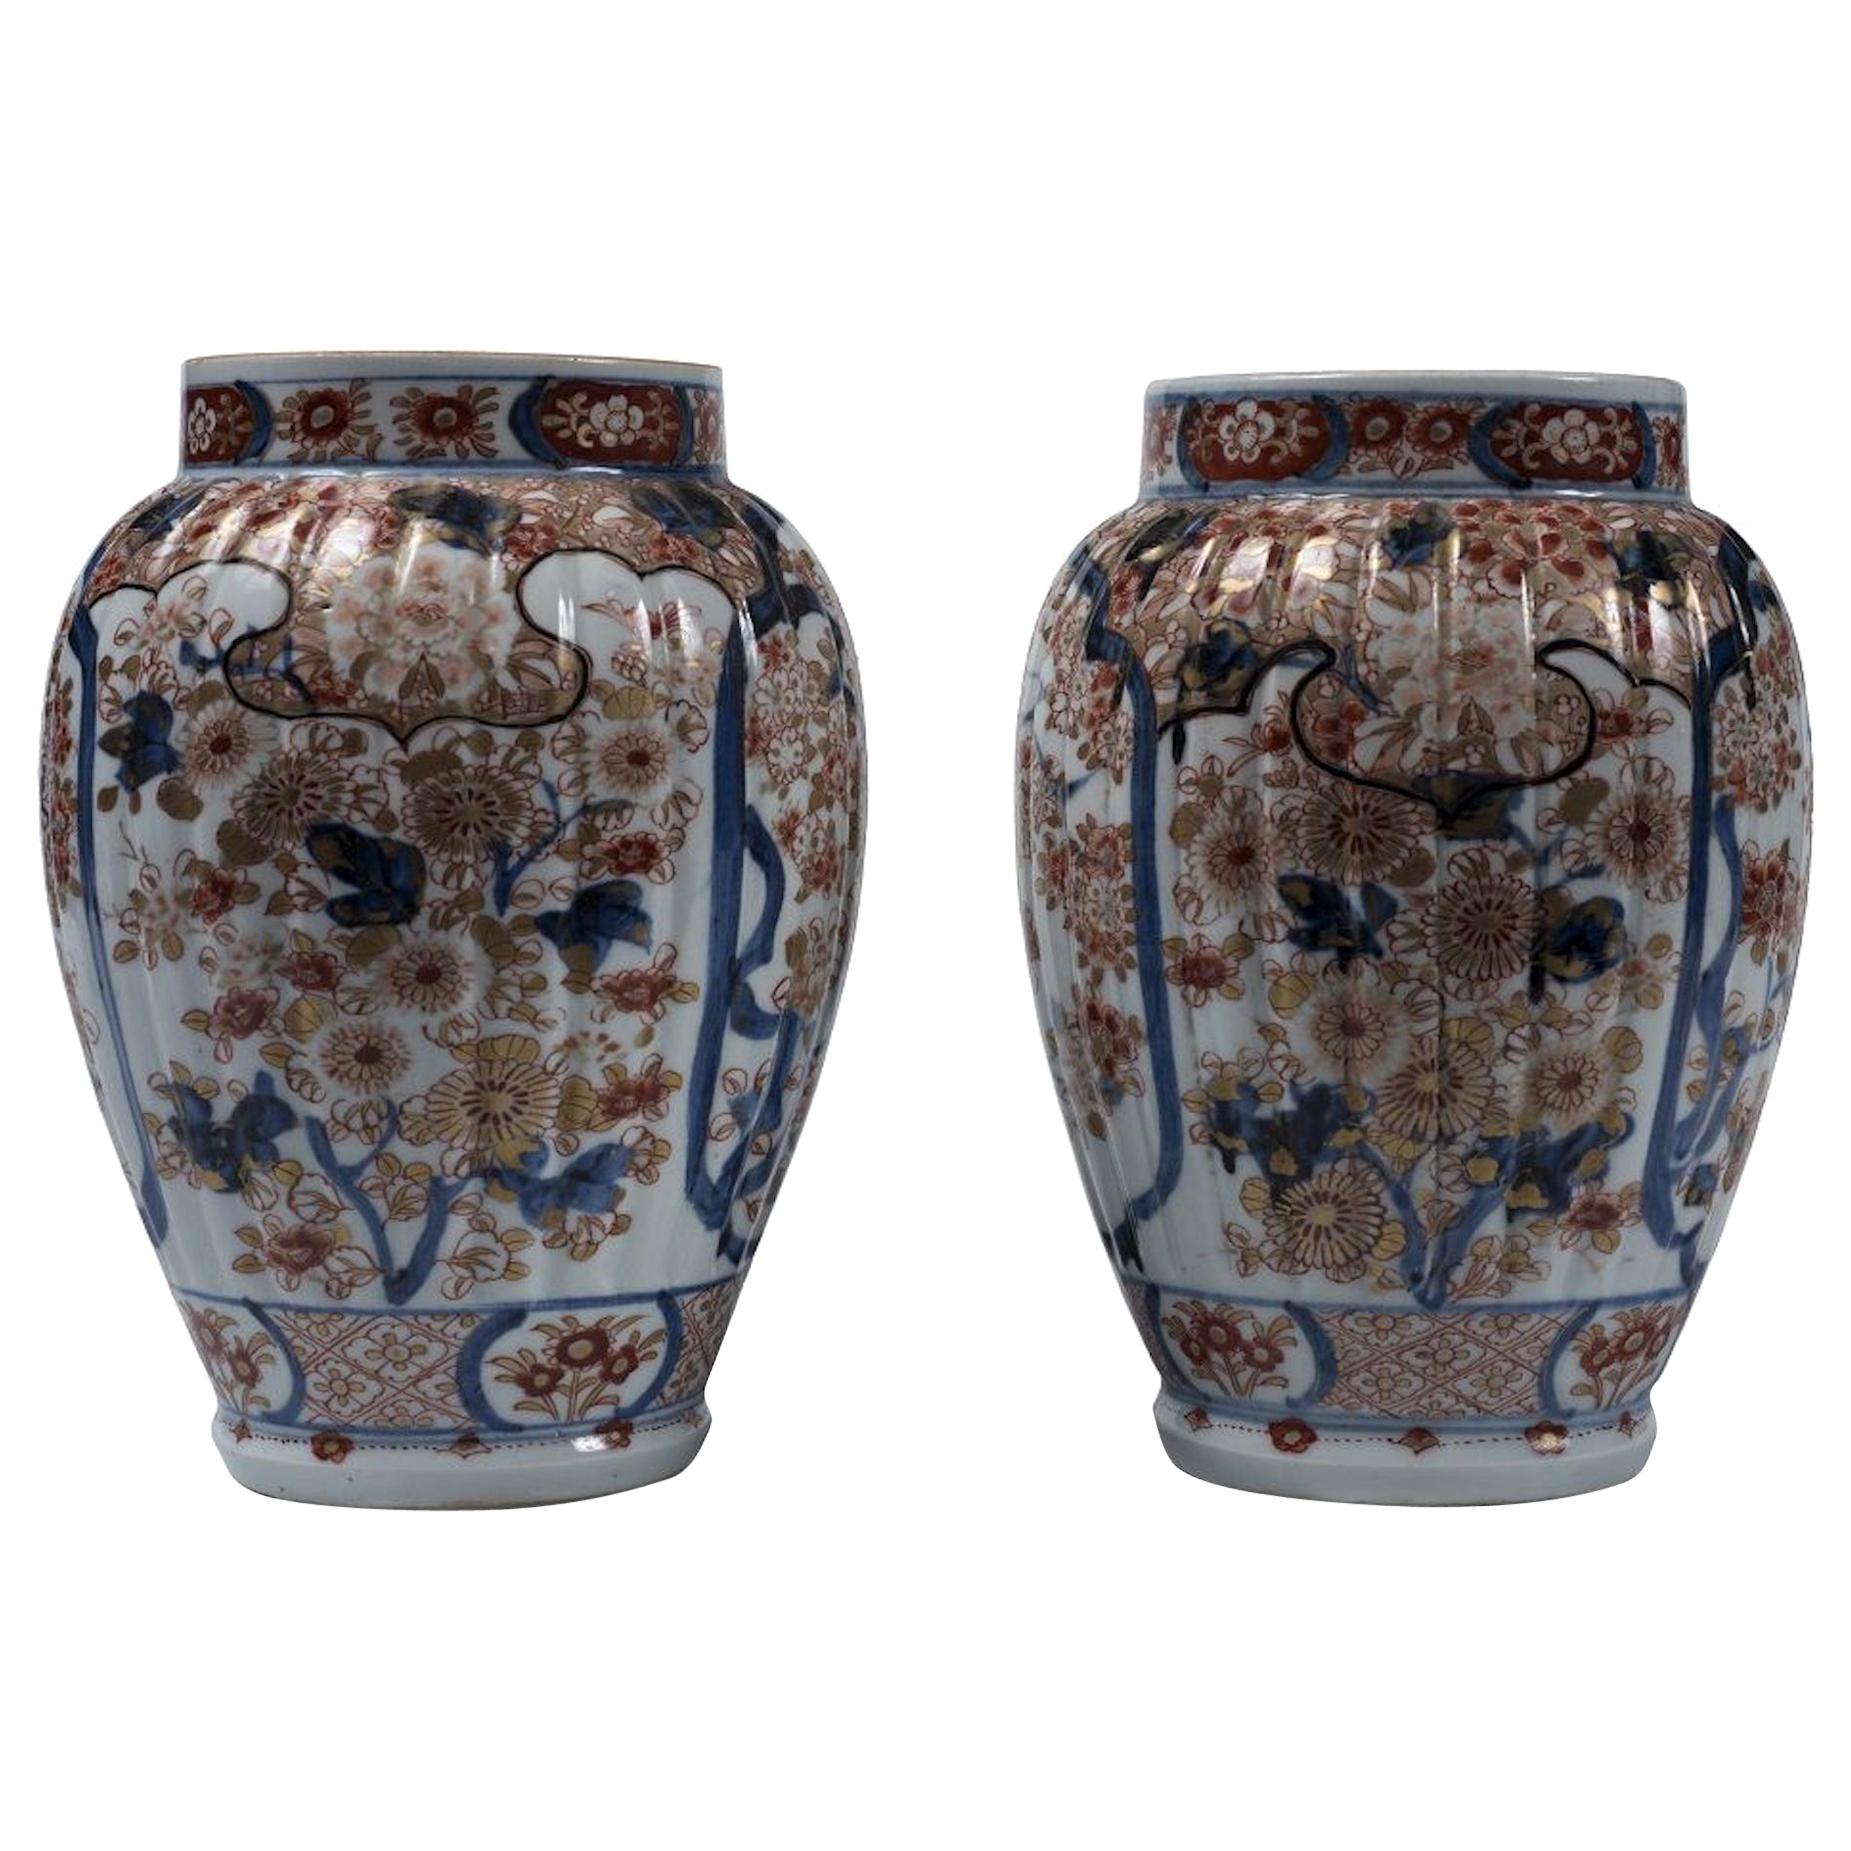 Pair of Antique Japanese Porcelain Vases, End of 19th Century For Sale